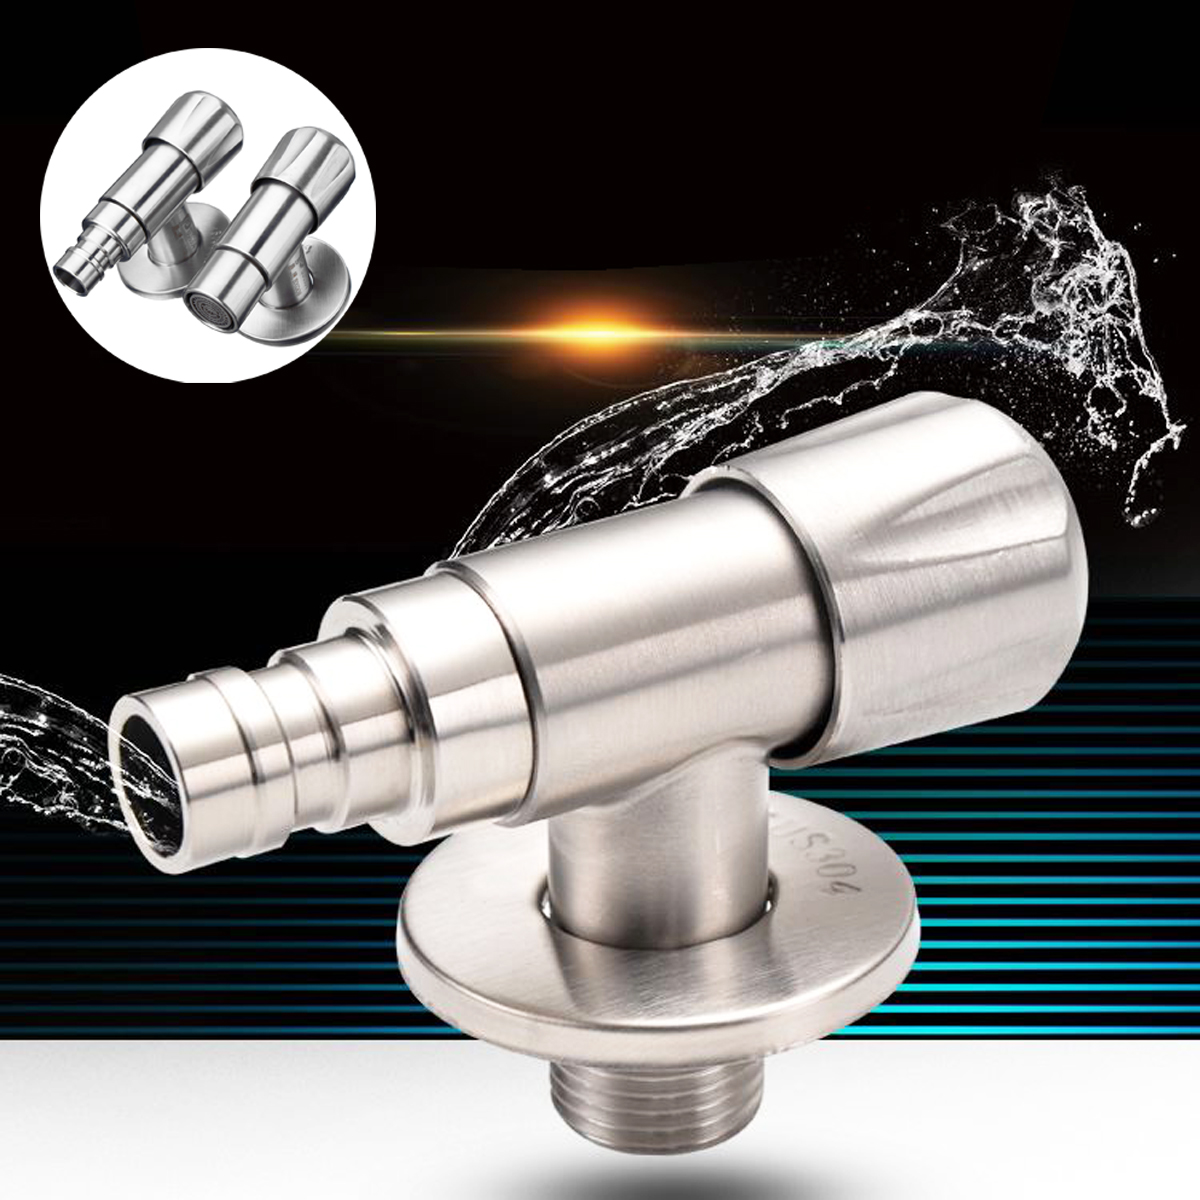 Stainless-Steel-Wall-Mounted-Faucet-Laundry-Bathroom-Washing-Machine-Garden-Tap-Faucets-Filter-Mouth-1282882